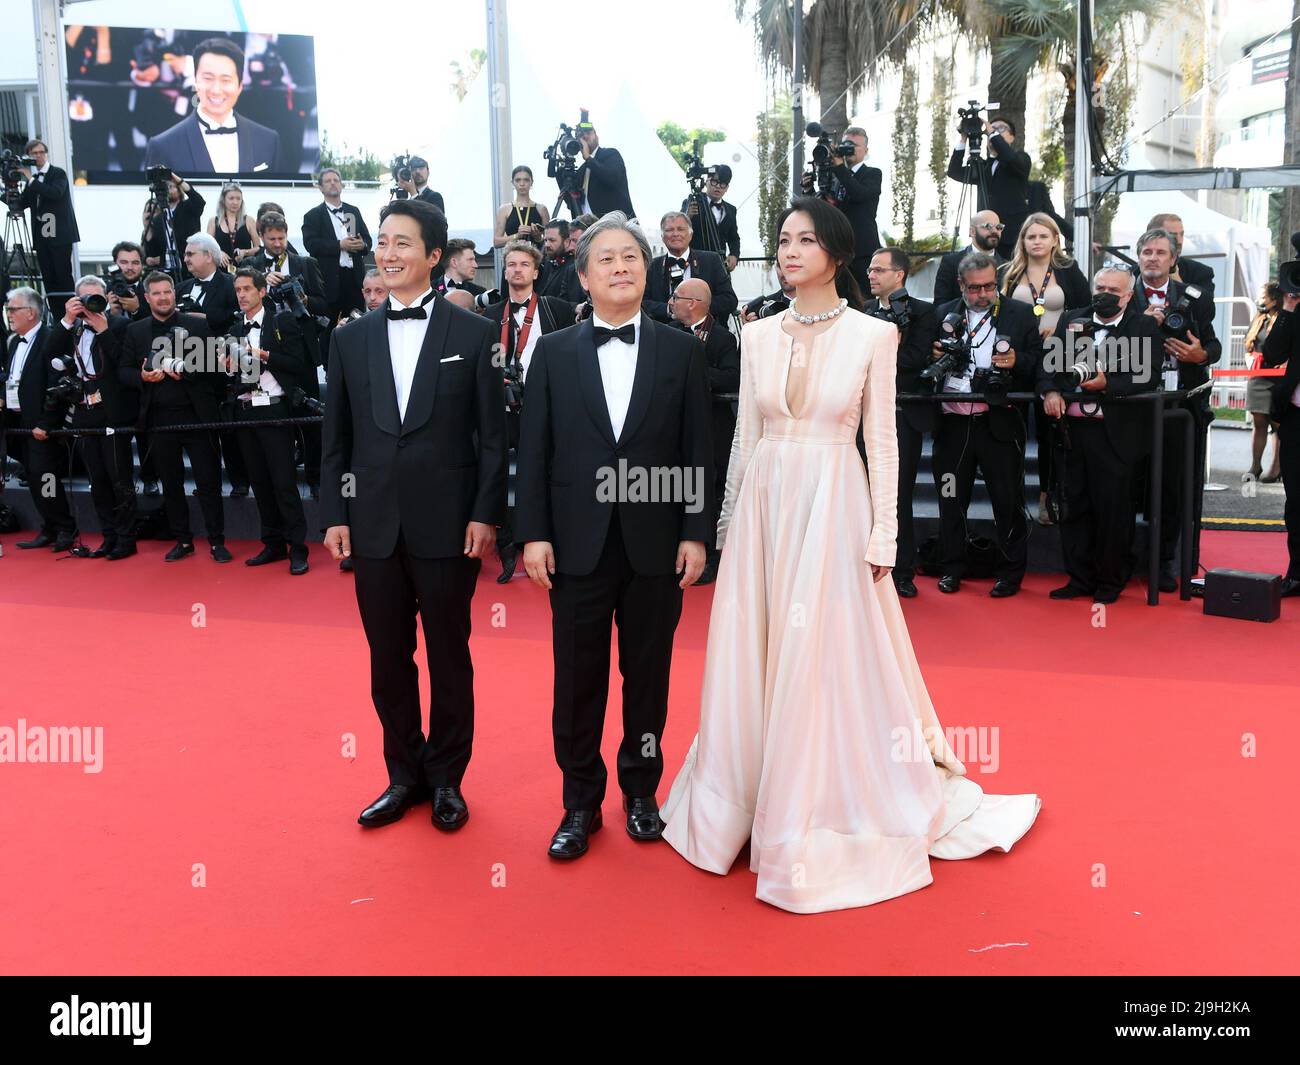 Cannes, France. 23rd May, 2022. South Korean actor Go Kyung-Pyo, director Park Chan-Wook and actress Tang Wei attend the premiere of Decision To Leave at Palais des Festivals at the 75th Cannes Film Festival, France on Monday, May 23, 2022. Photo by Rune Hellestad/ Credit: UPI/Alamy Live News Stock Photo